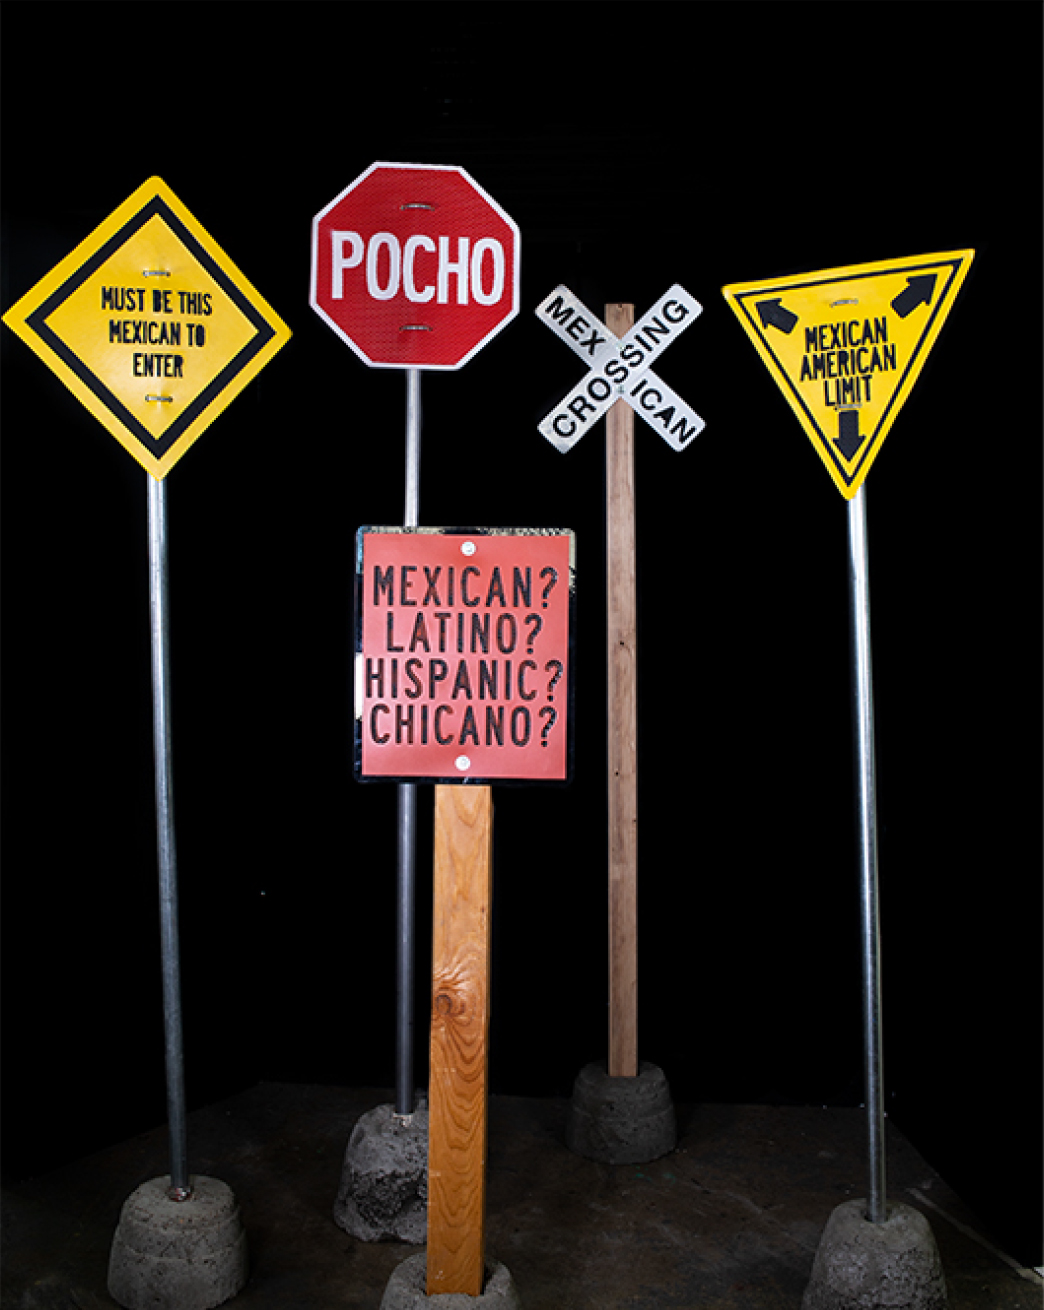 Photo of five fake road signs against a black background with messages aimed at Mexicans and Mexican Americans, like Pocho and Must Be This Mexican to Enter